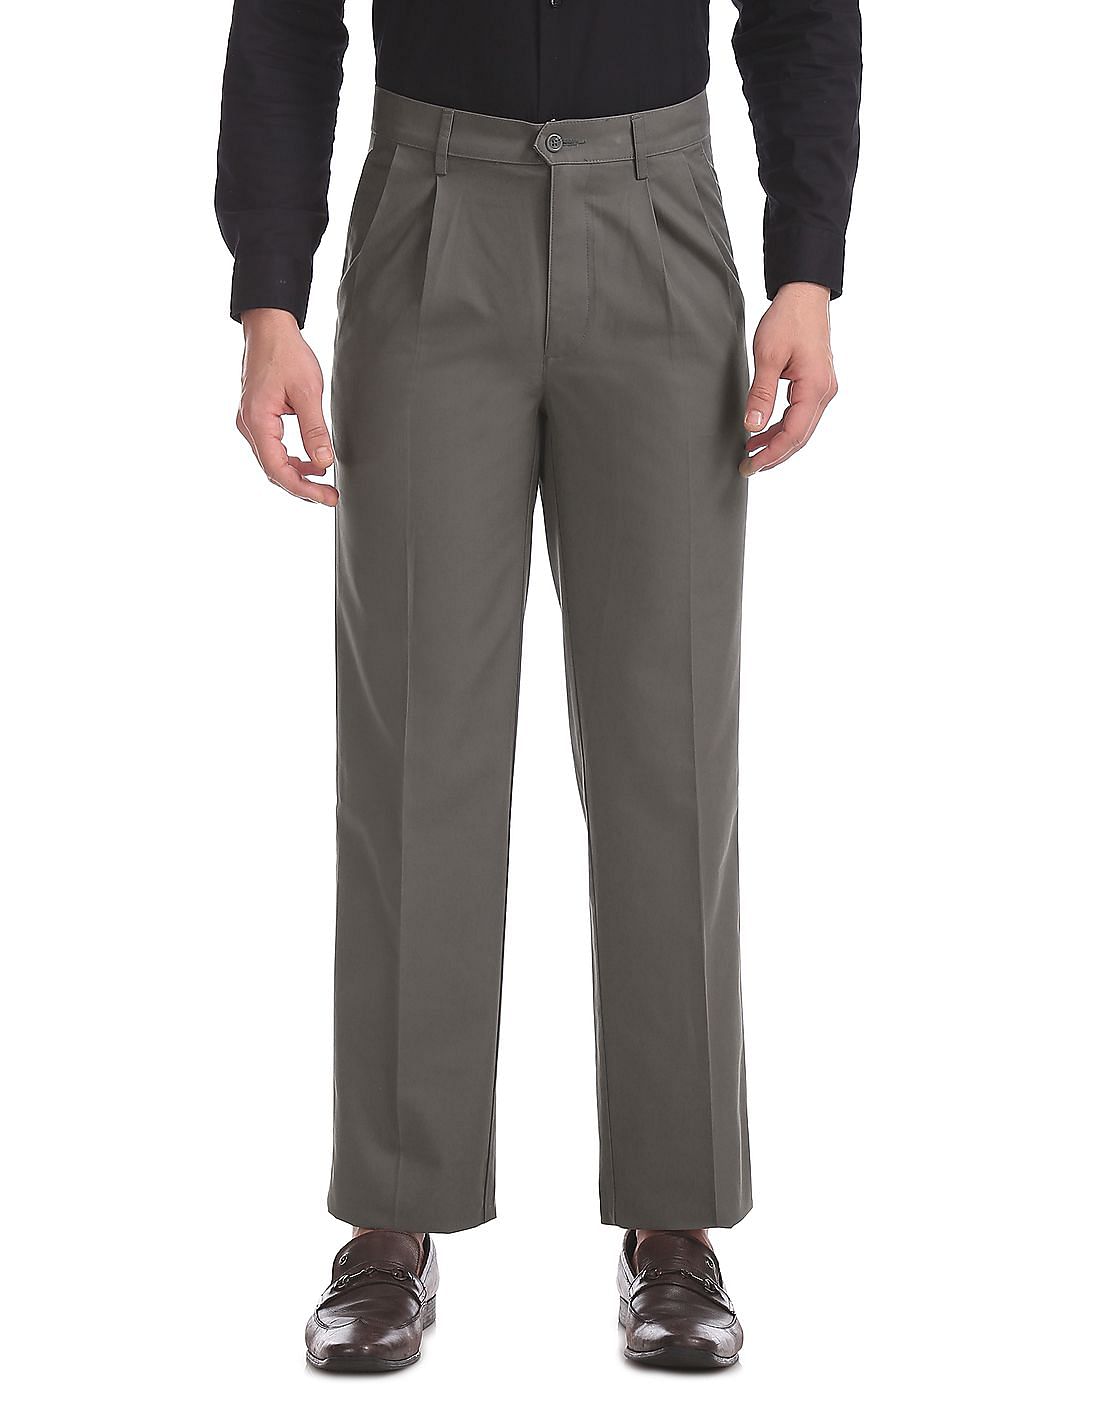 Buy Arrow Sports Regular Fit Pleated Front Trousers - NNNOW.com